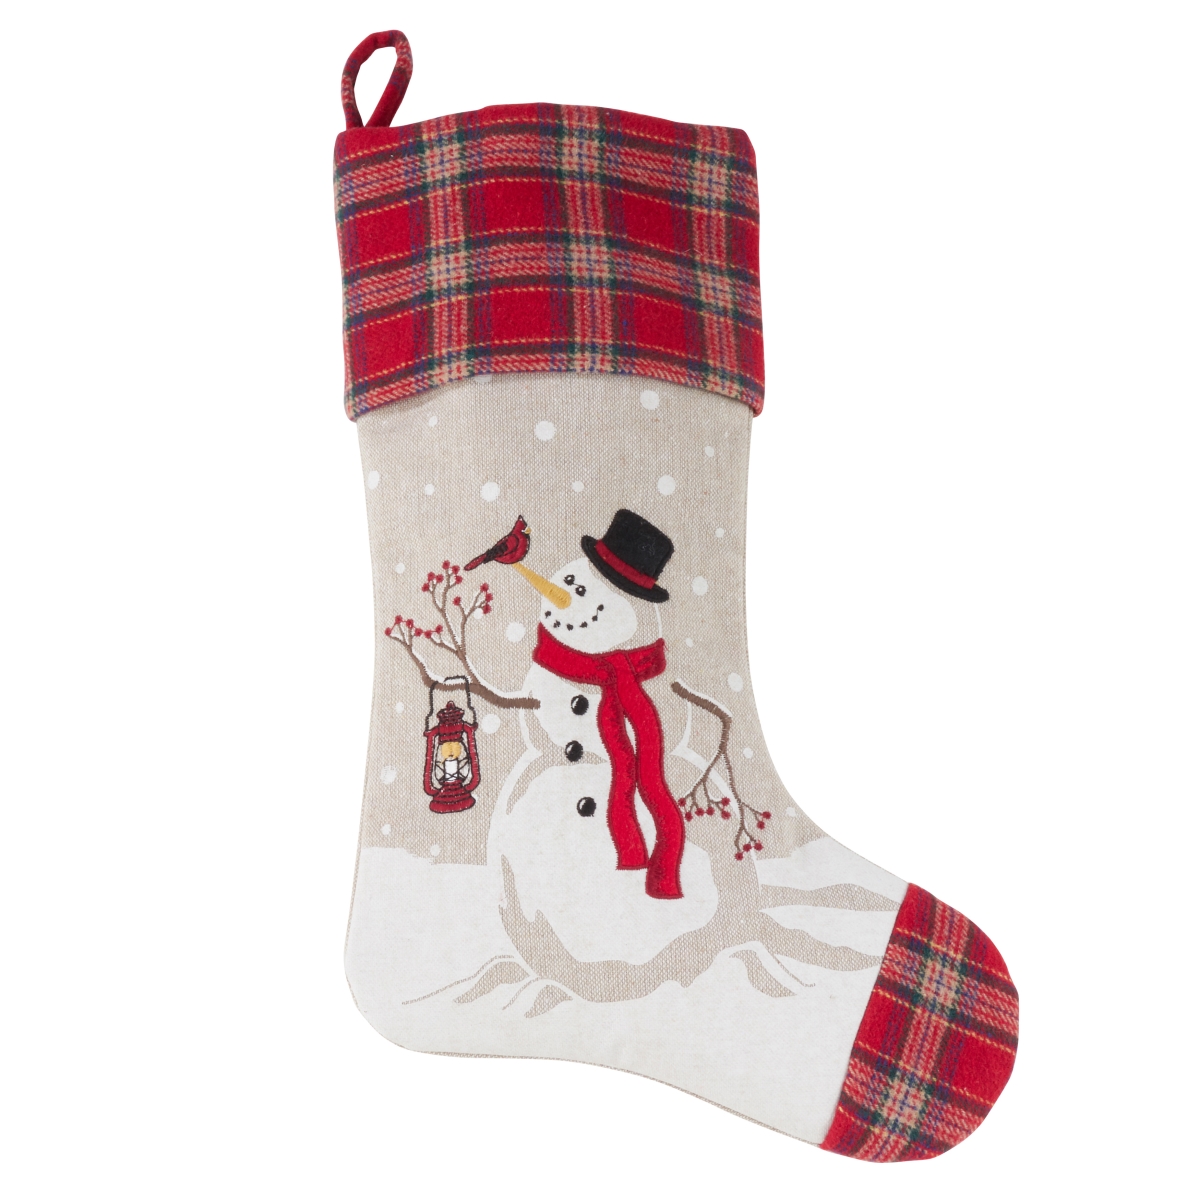 7754.m1620 16 X 20 In. Holiday Stocking With Happy Snowman Design & Plaid Border - Multi Color, Set Of 4